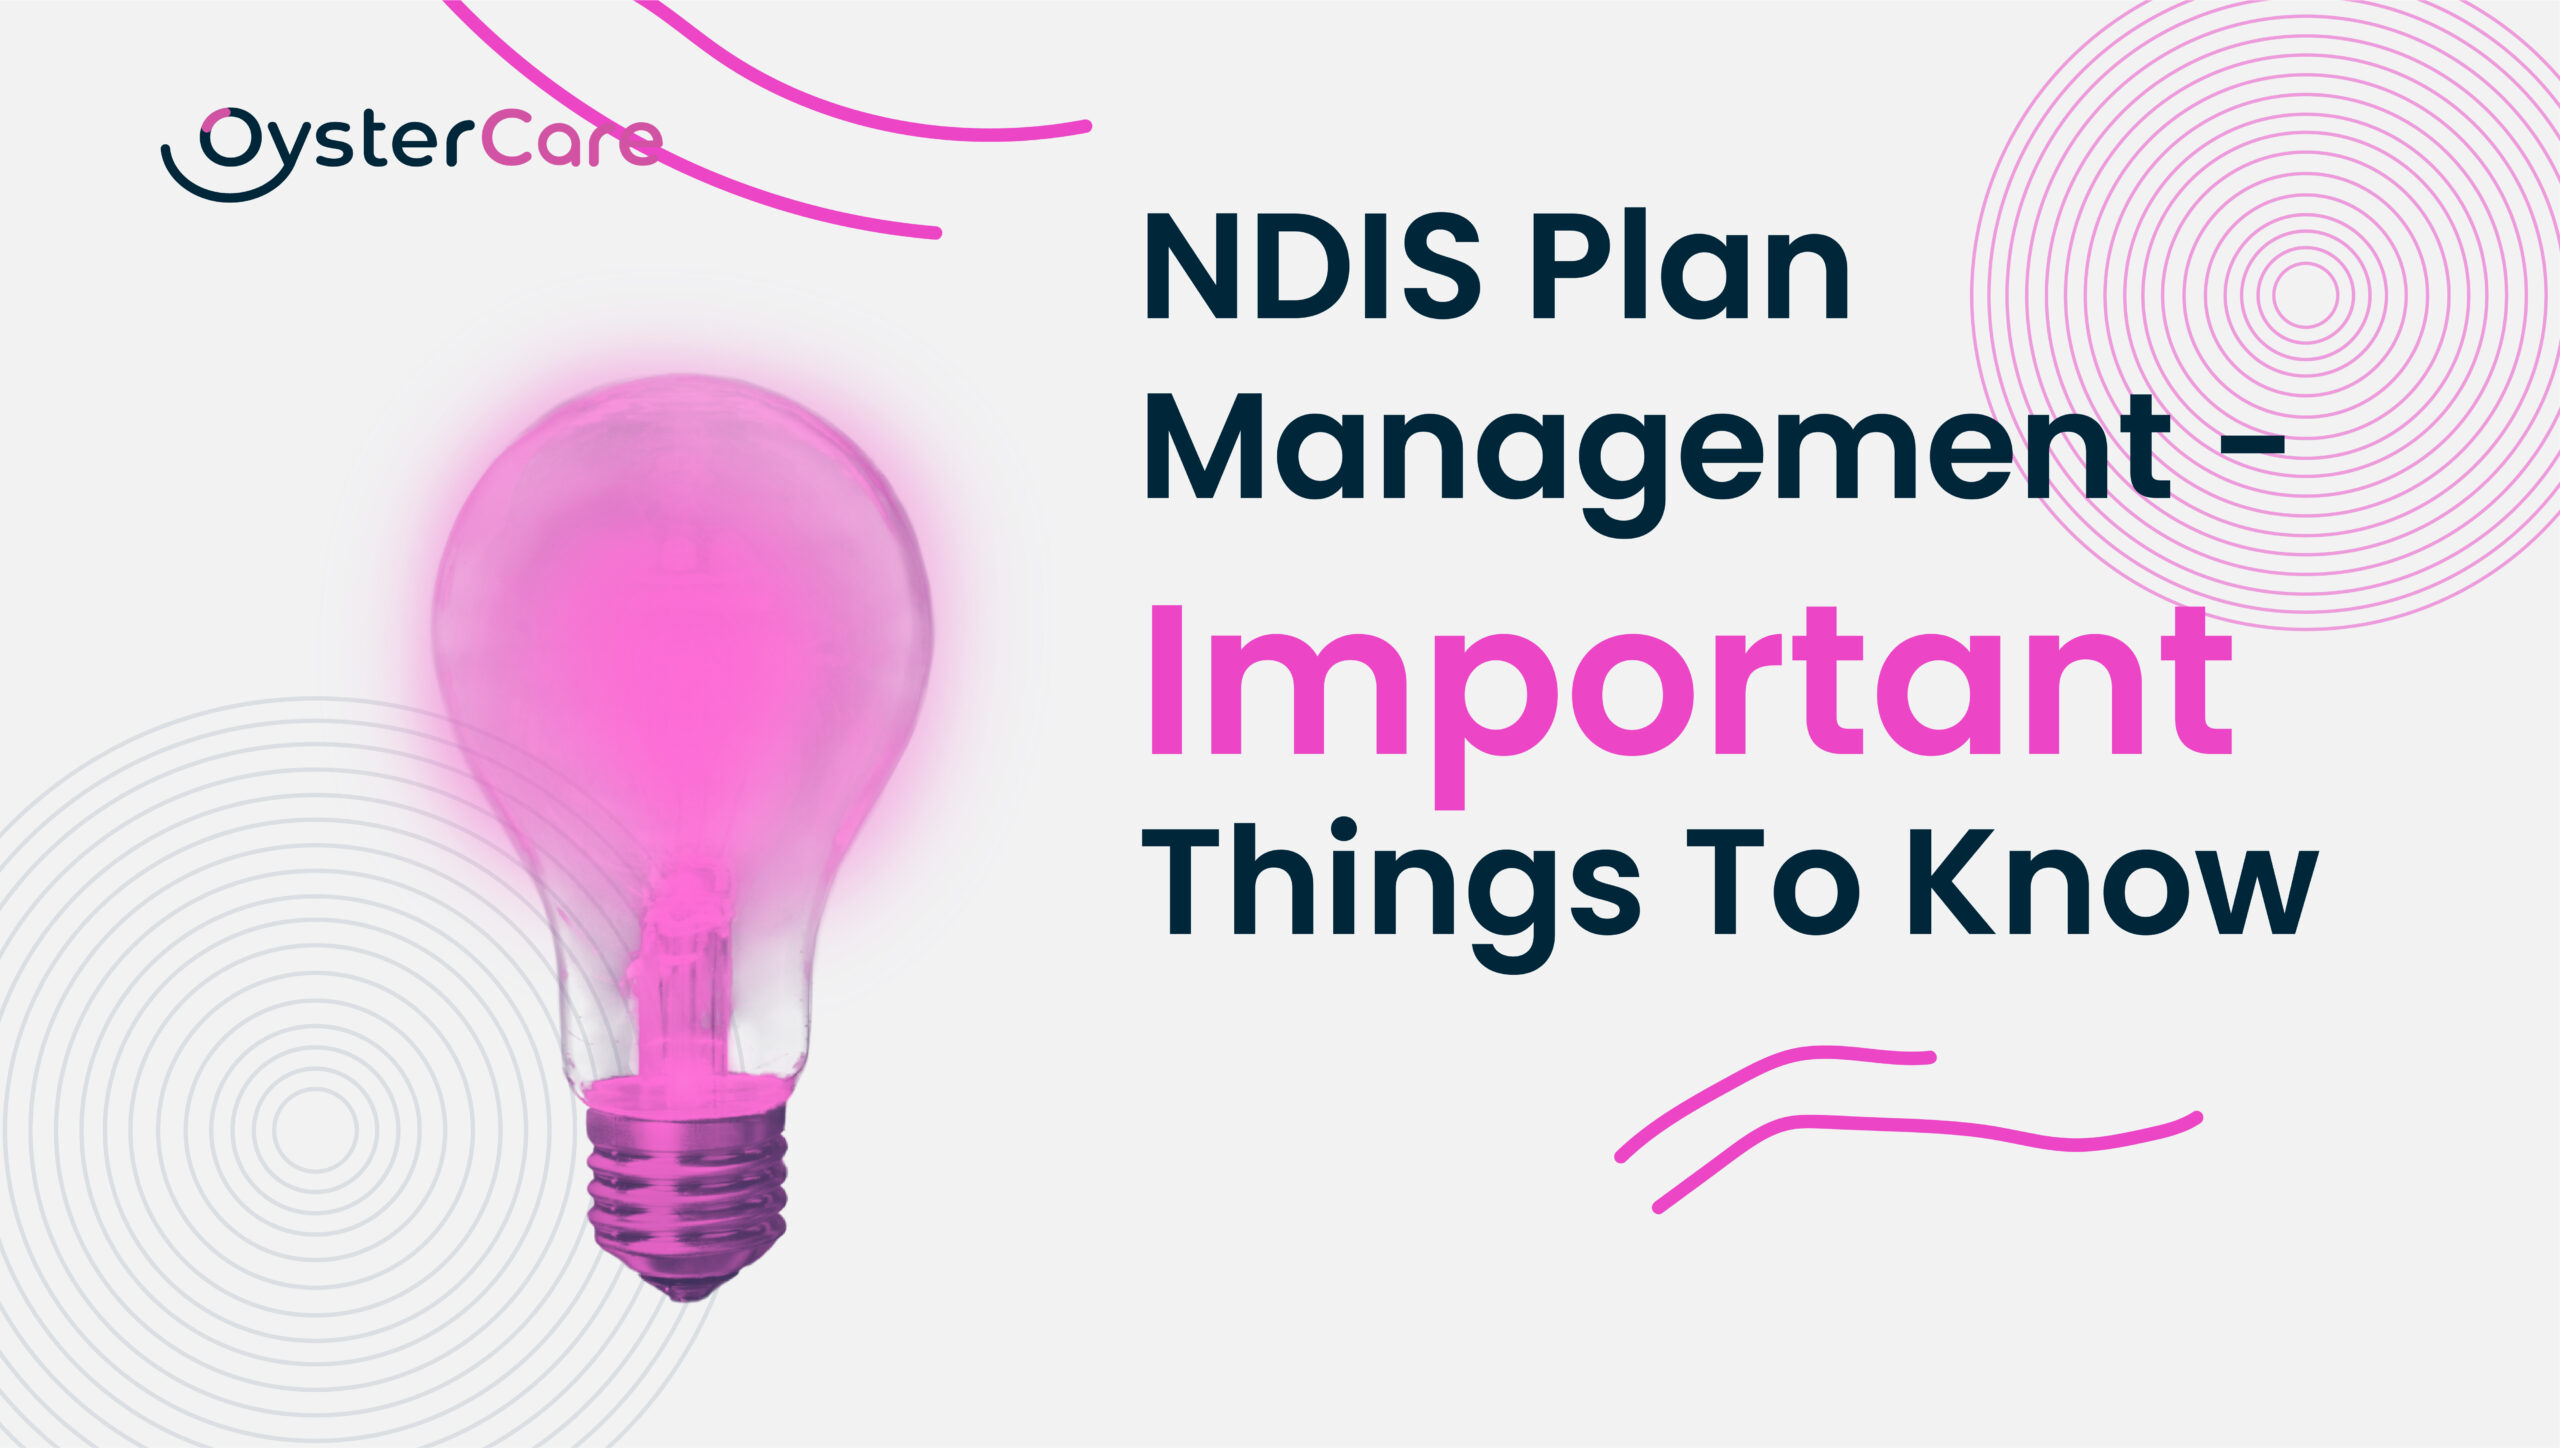 2) NDIS Plan Management - Important Things To Know